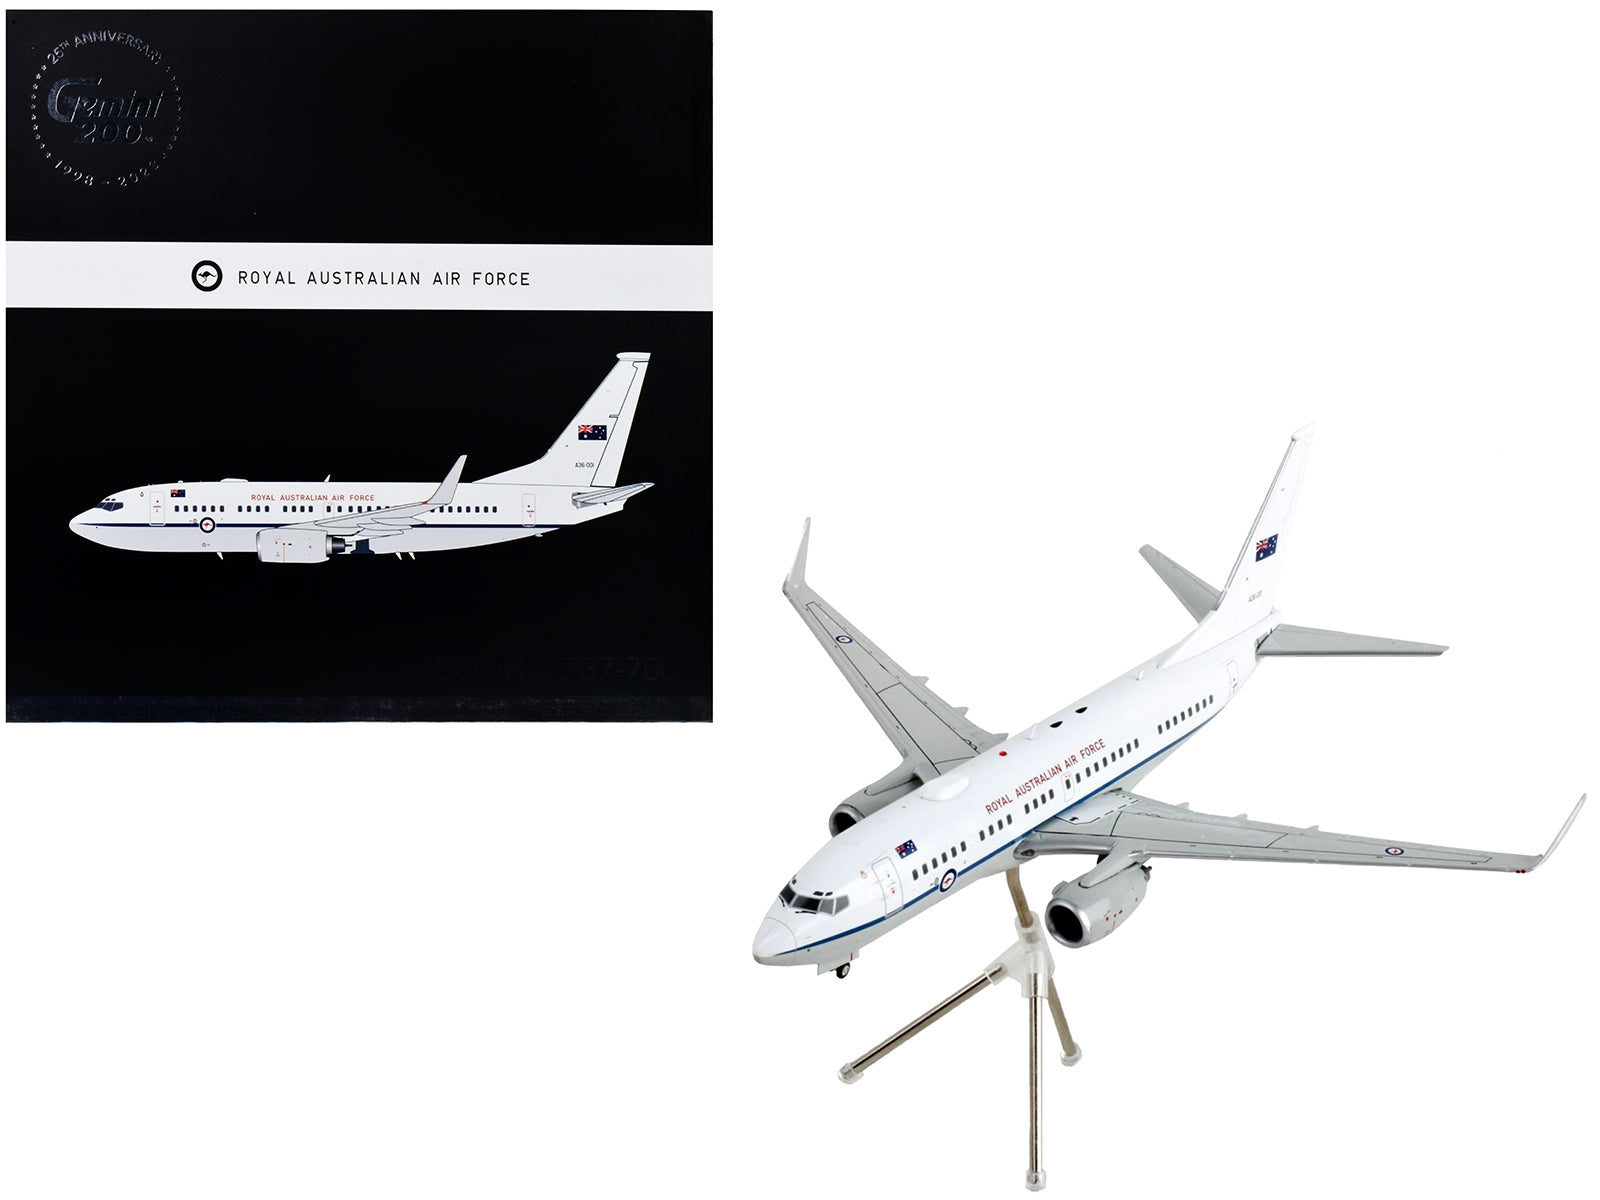 Boeing 737-700 Transport Aircraft "Royal Australian Air Force - A36-001" White and Gray "Gemini 200" Series 1/200 Diecast Model Airplane by GeminiJets